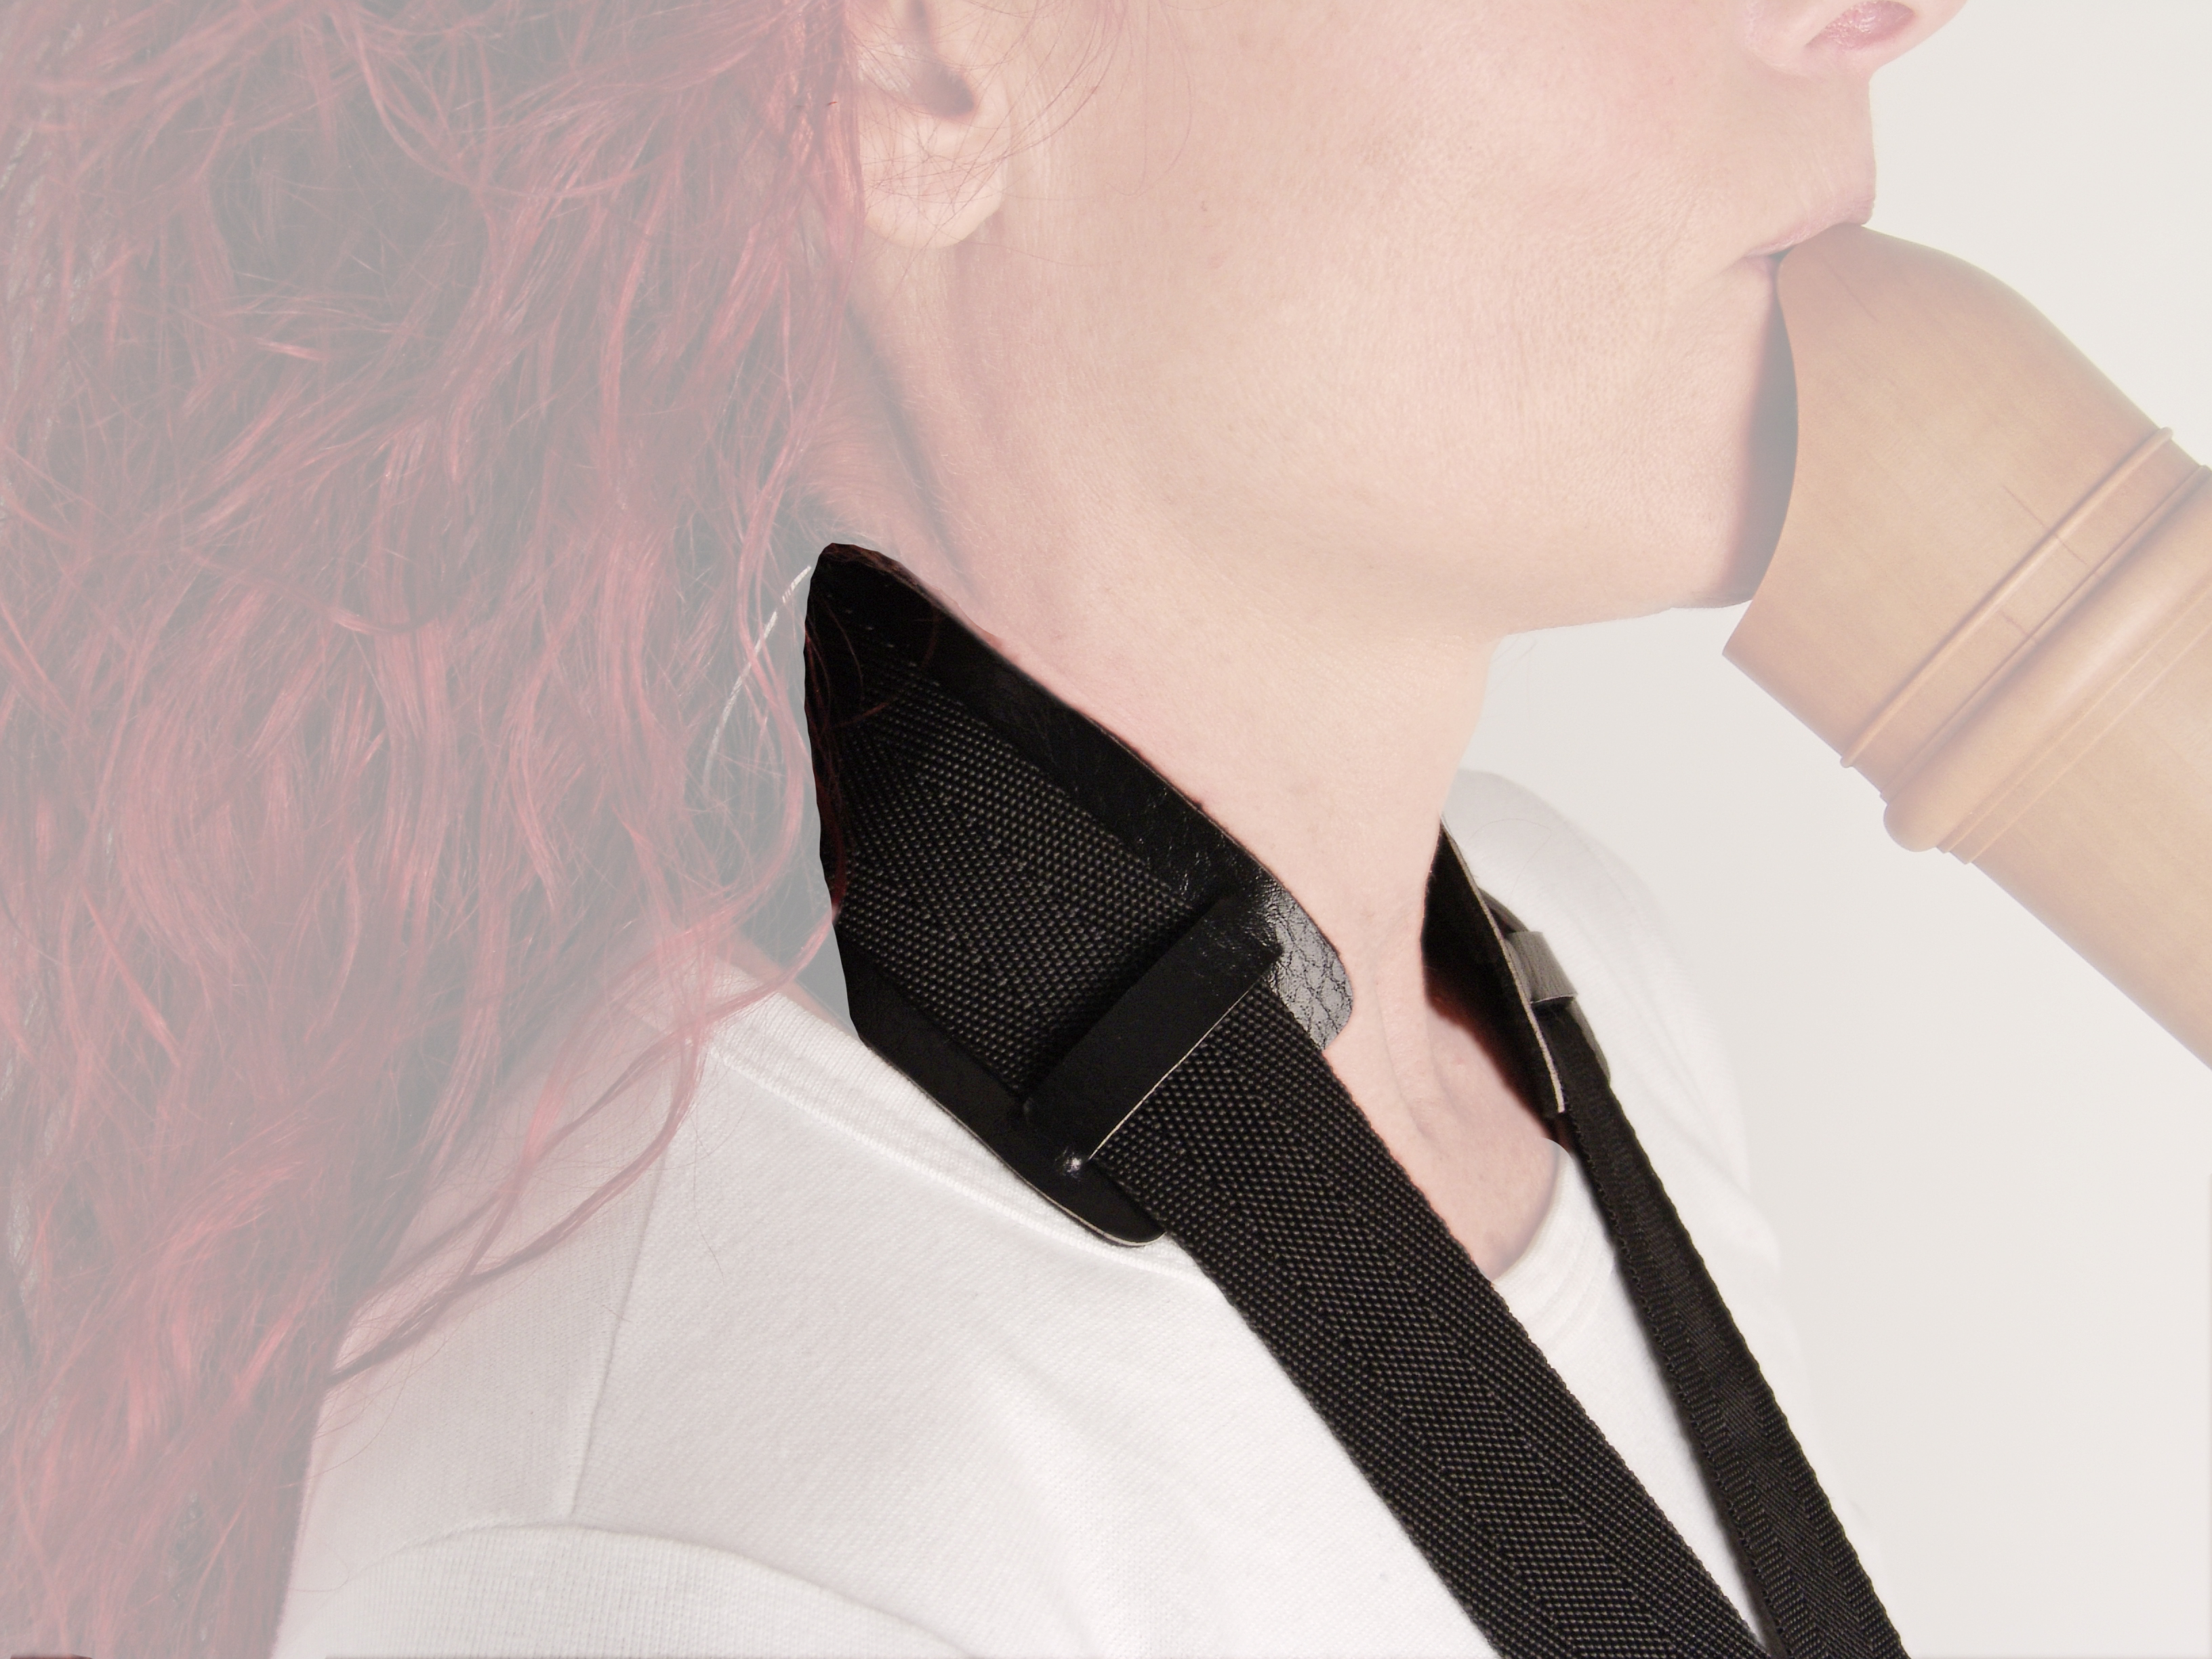 bass strap, 35 mm wide, with soft neck guard